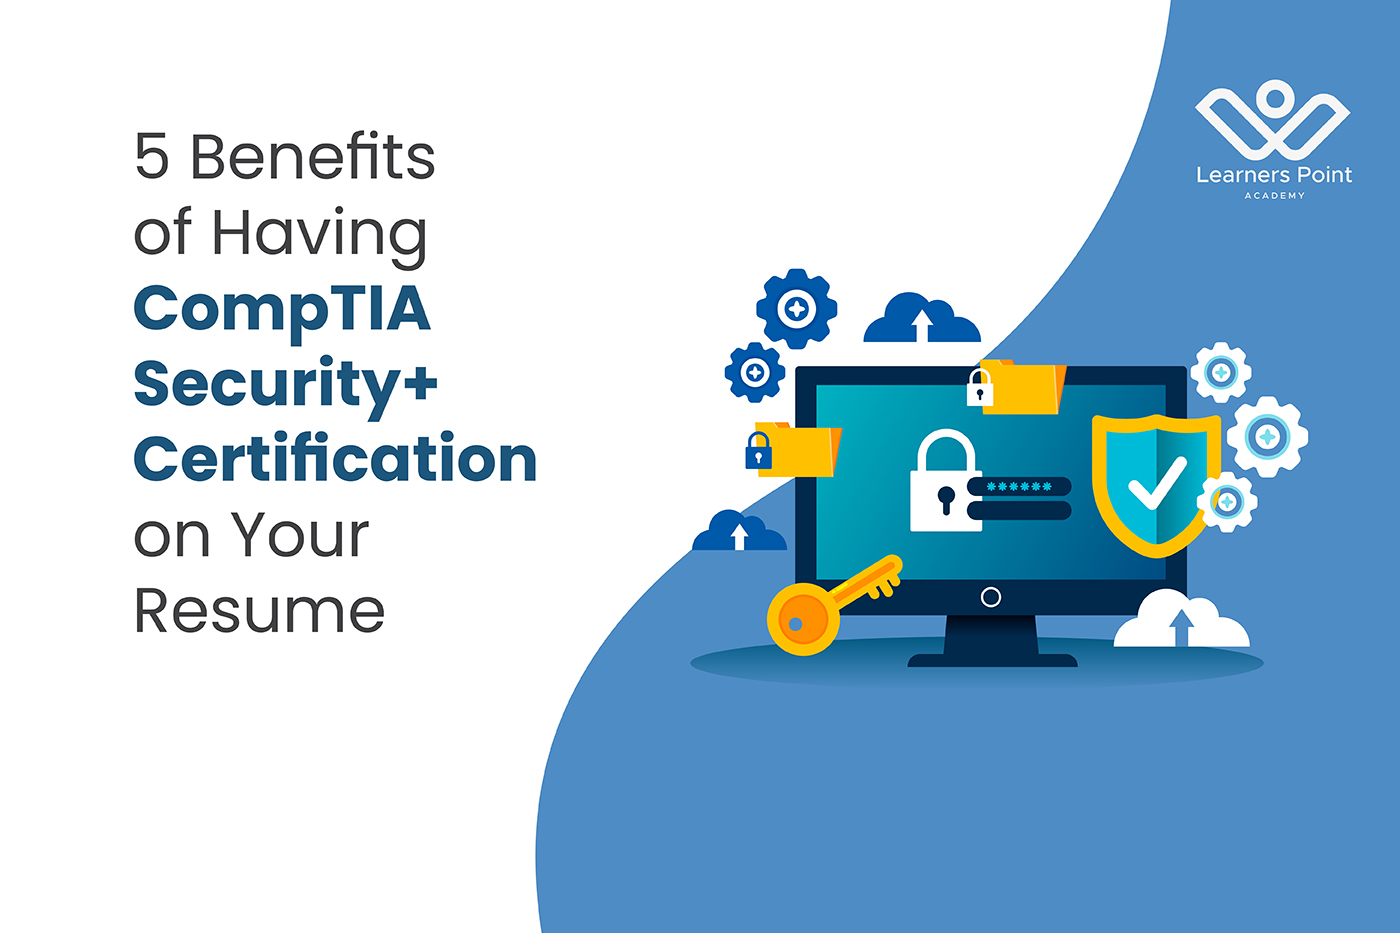 5 Benefits of Having CompTIA Security+ Certification on Your Resume